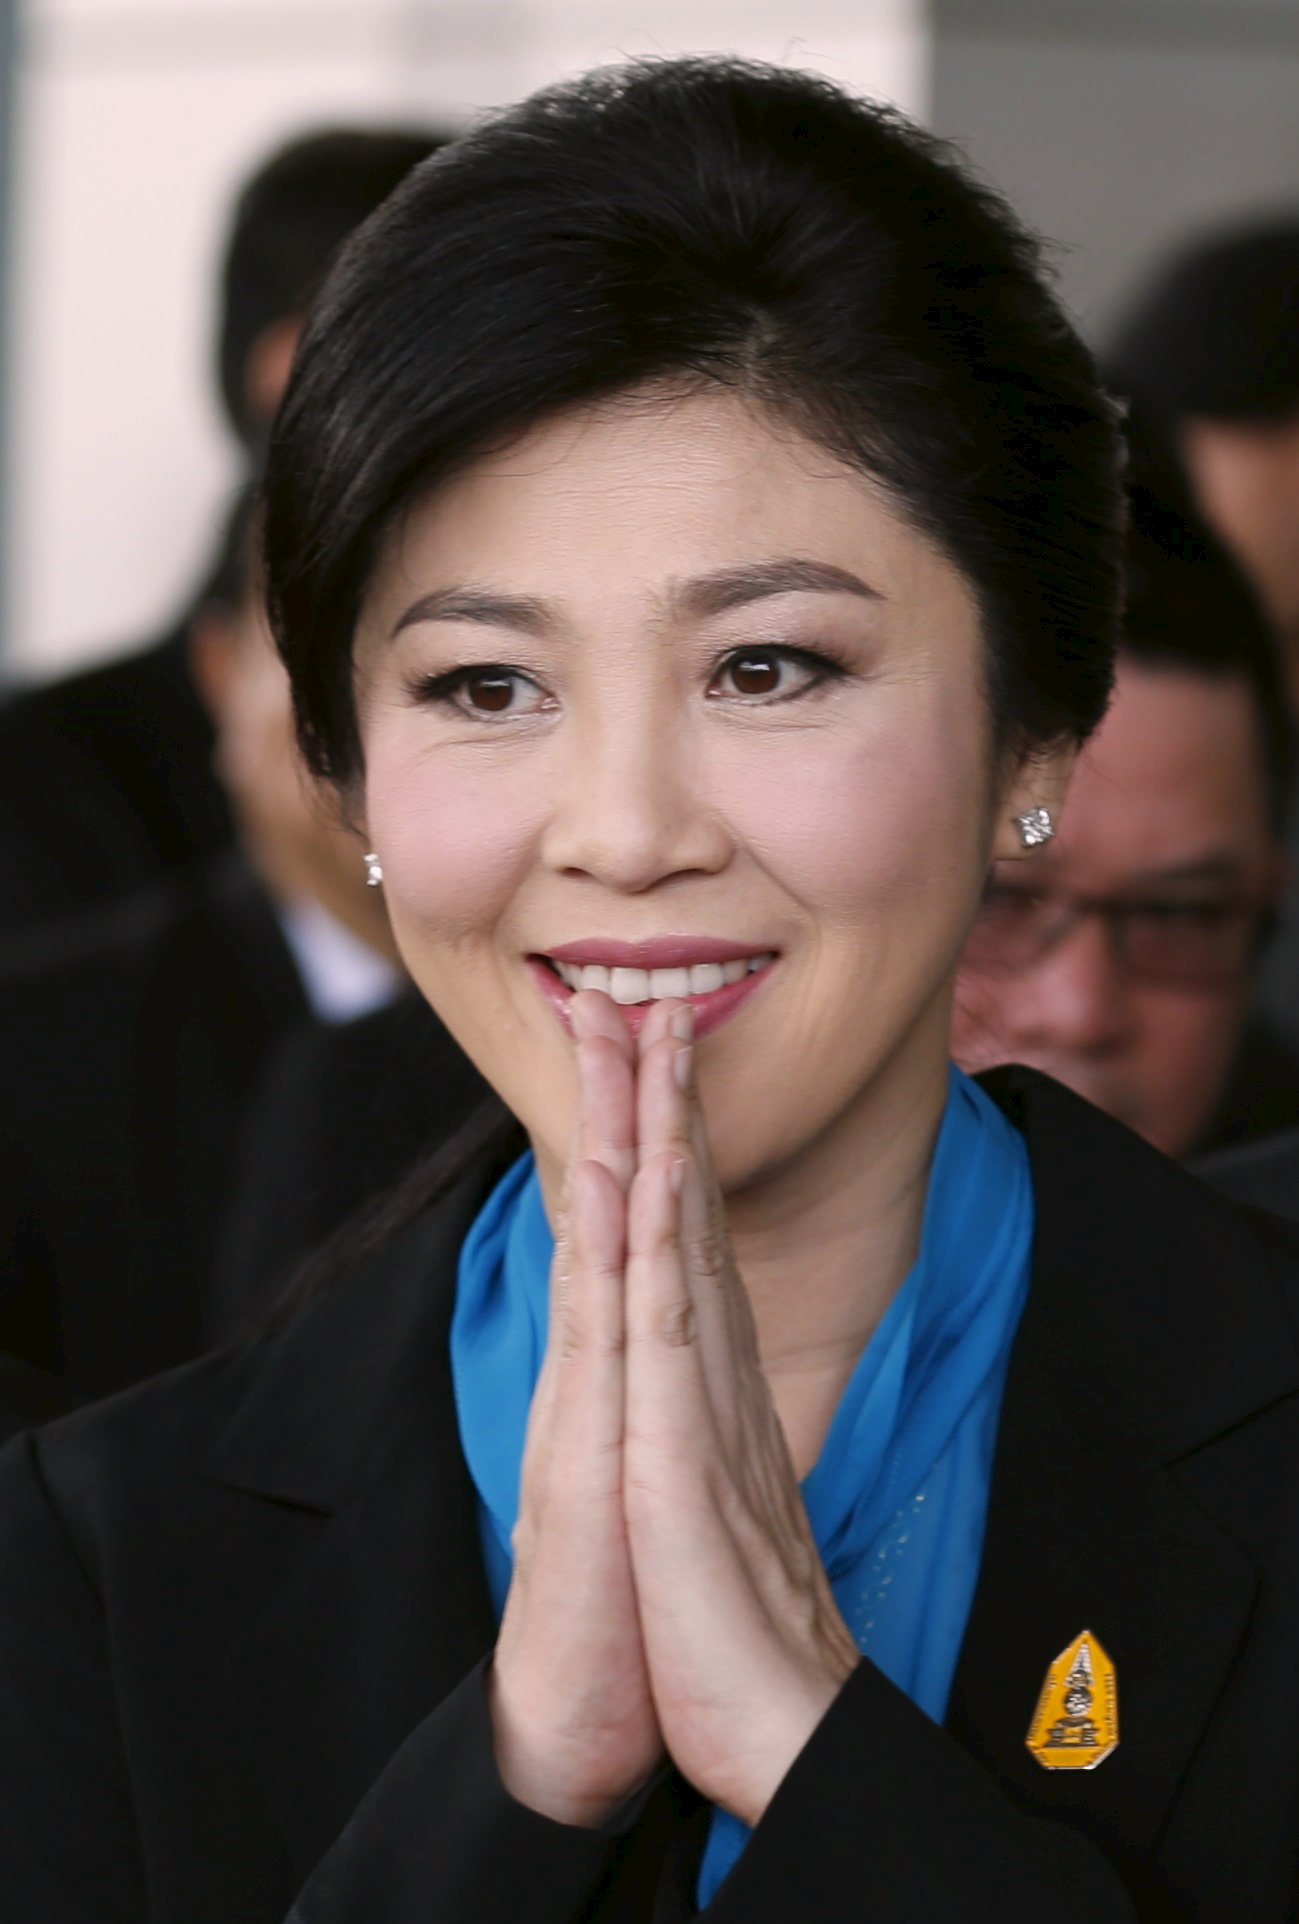 Ousted former Thai Prime Minister Yingluck Shinawatra gestures as she arrives at the Supreme Court in Bangkok, Thailand, August 31, 2015. Former PM Yingluck Shinawatra arrived at Supreme Court Photo: Reuters 